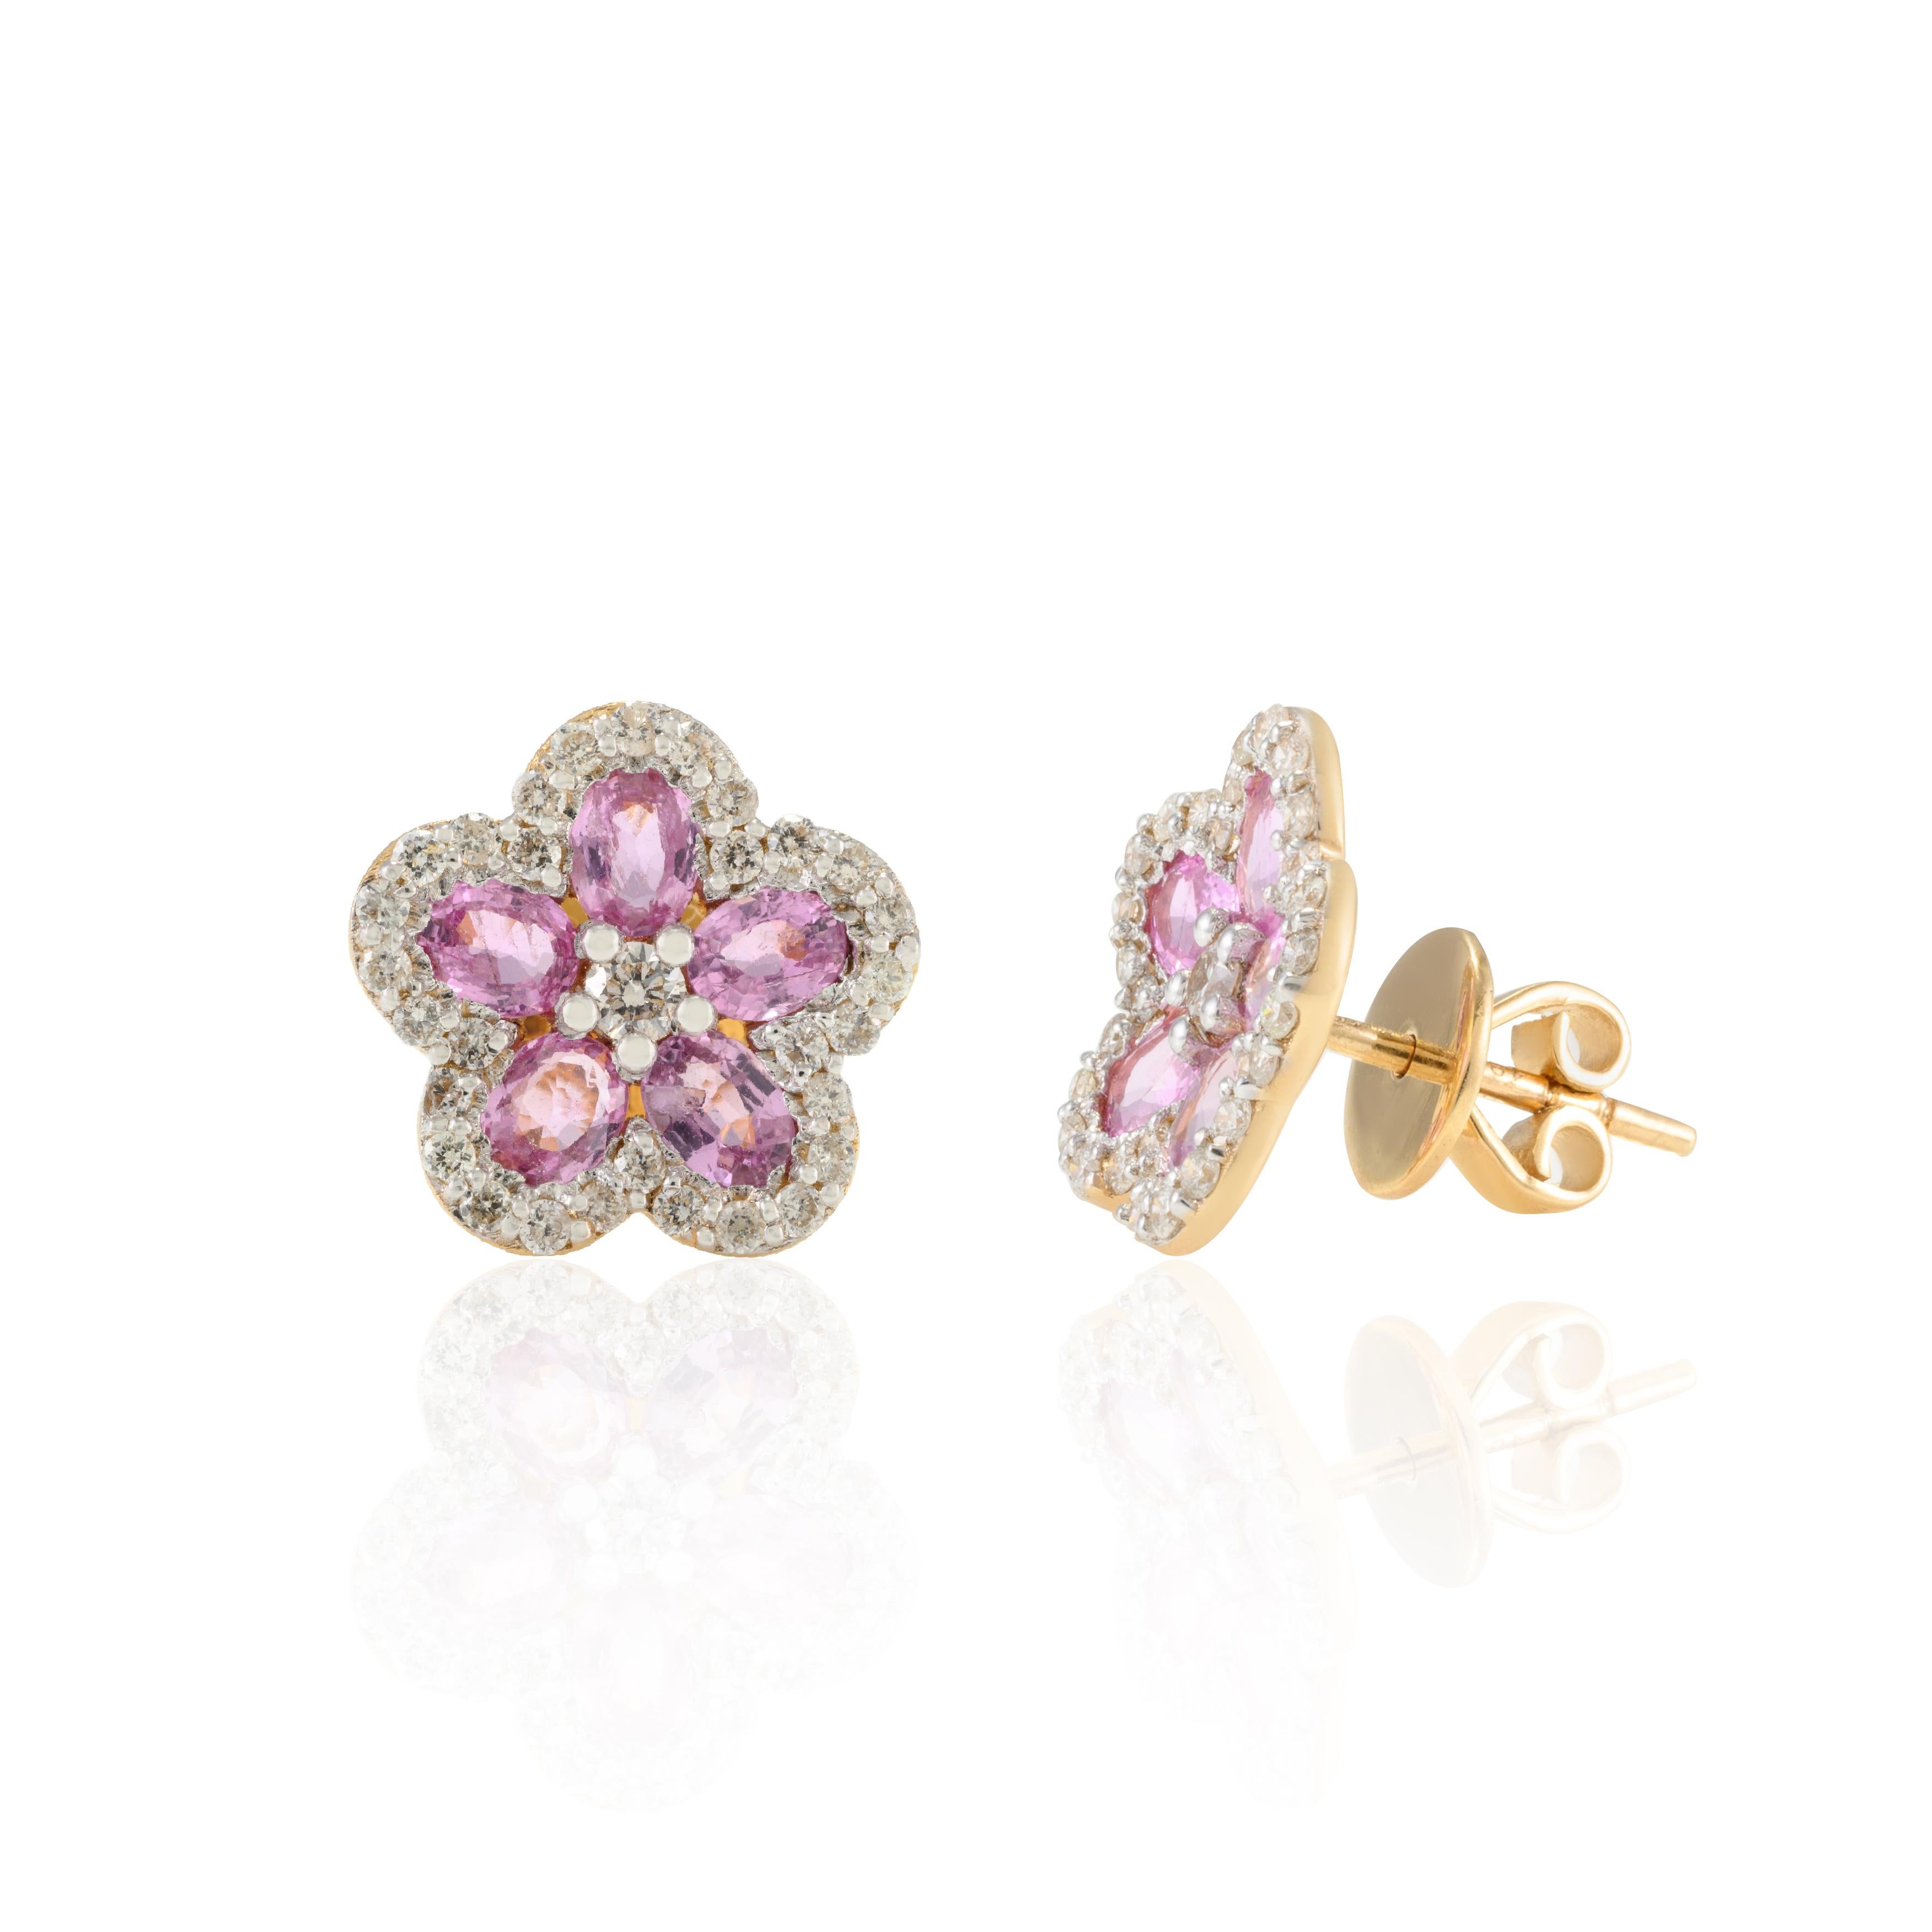 Cherry Blossom Pink Sapphire Diamond Flower Stud Earrings in 18k Yellow Gold In New Condition For Sale In Houston, TX